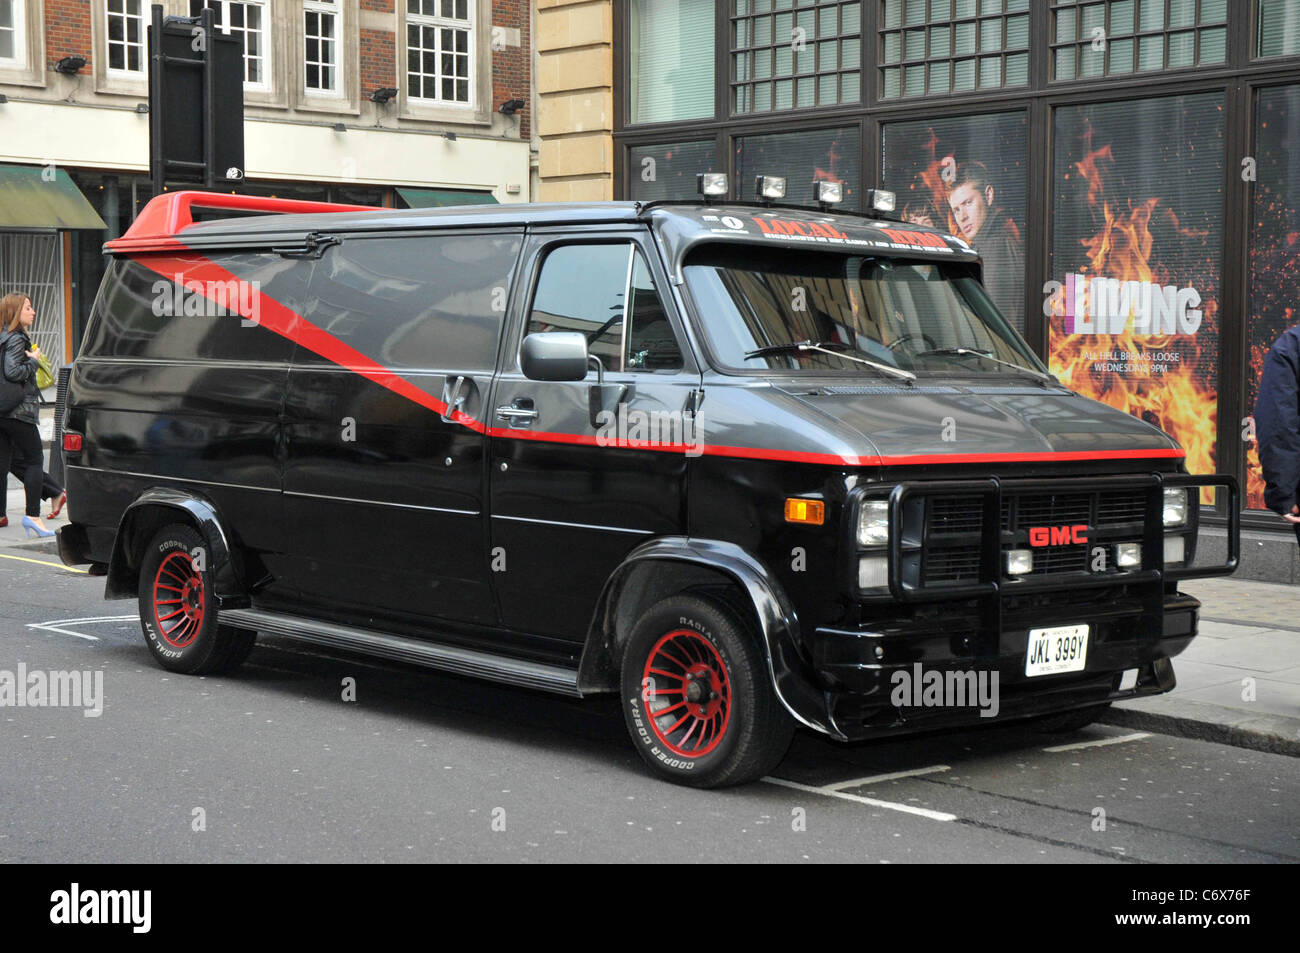 A Replica of the 'A Team' van Parked outside the BBC radio One studios, promoting BBC Radio One Xtra London, England - 19.04.10 Stock Photo